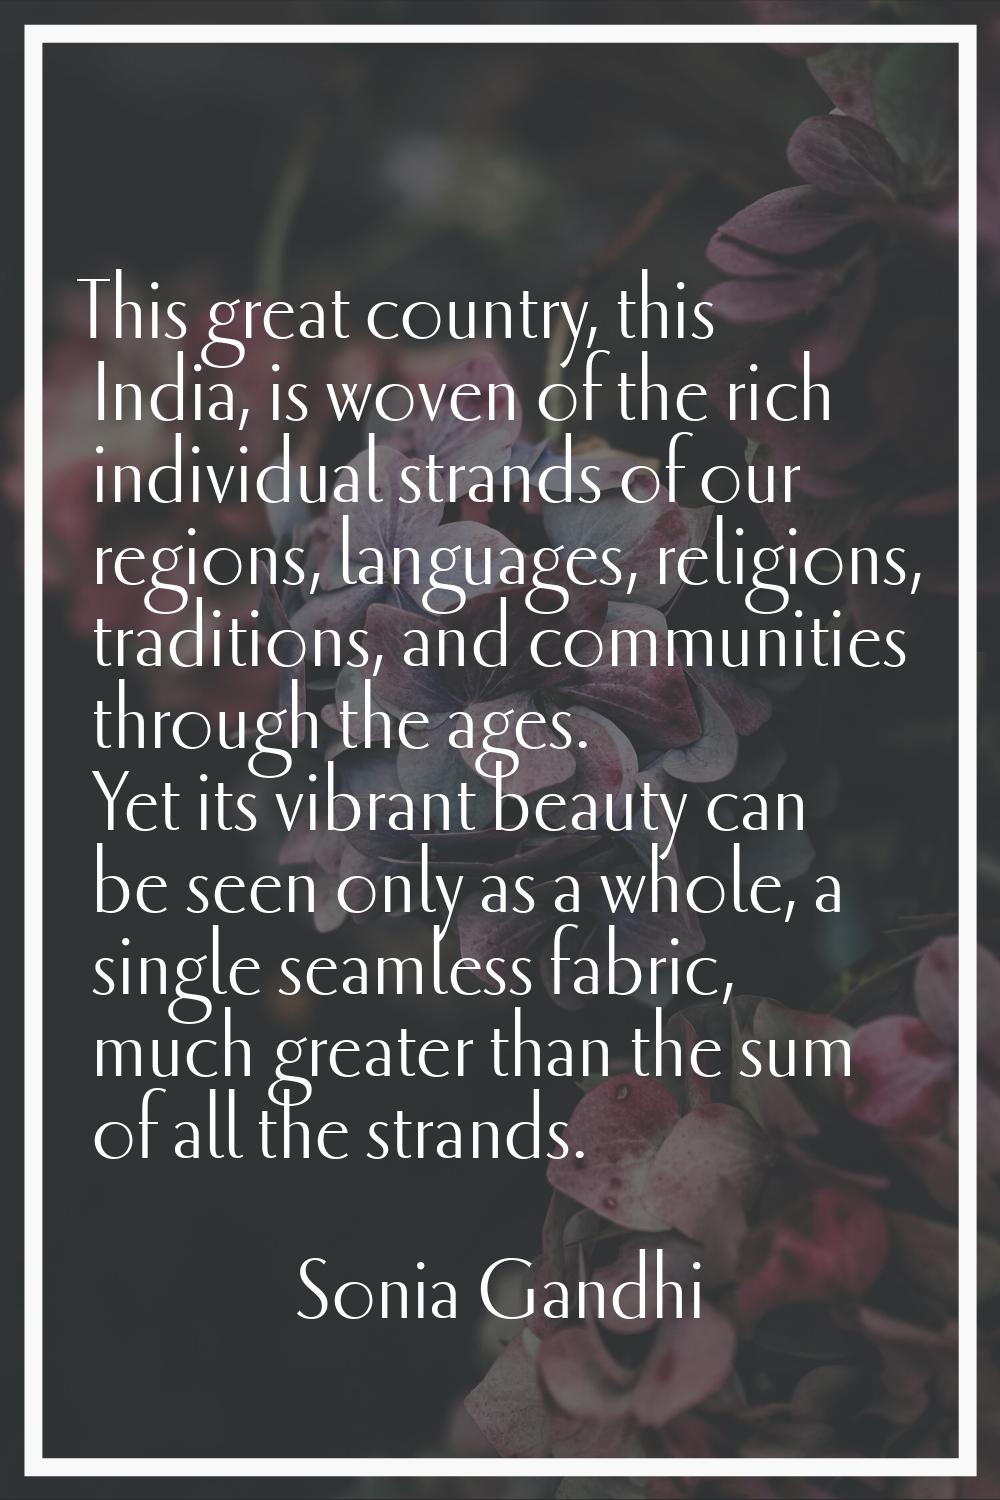 This great country, this India, is woven of the rich individual strands of our regions, languages, 